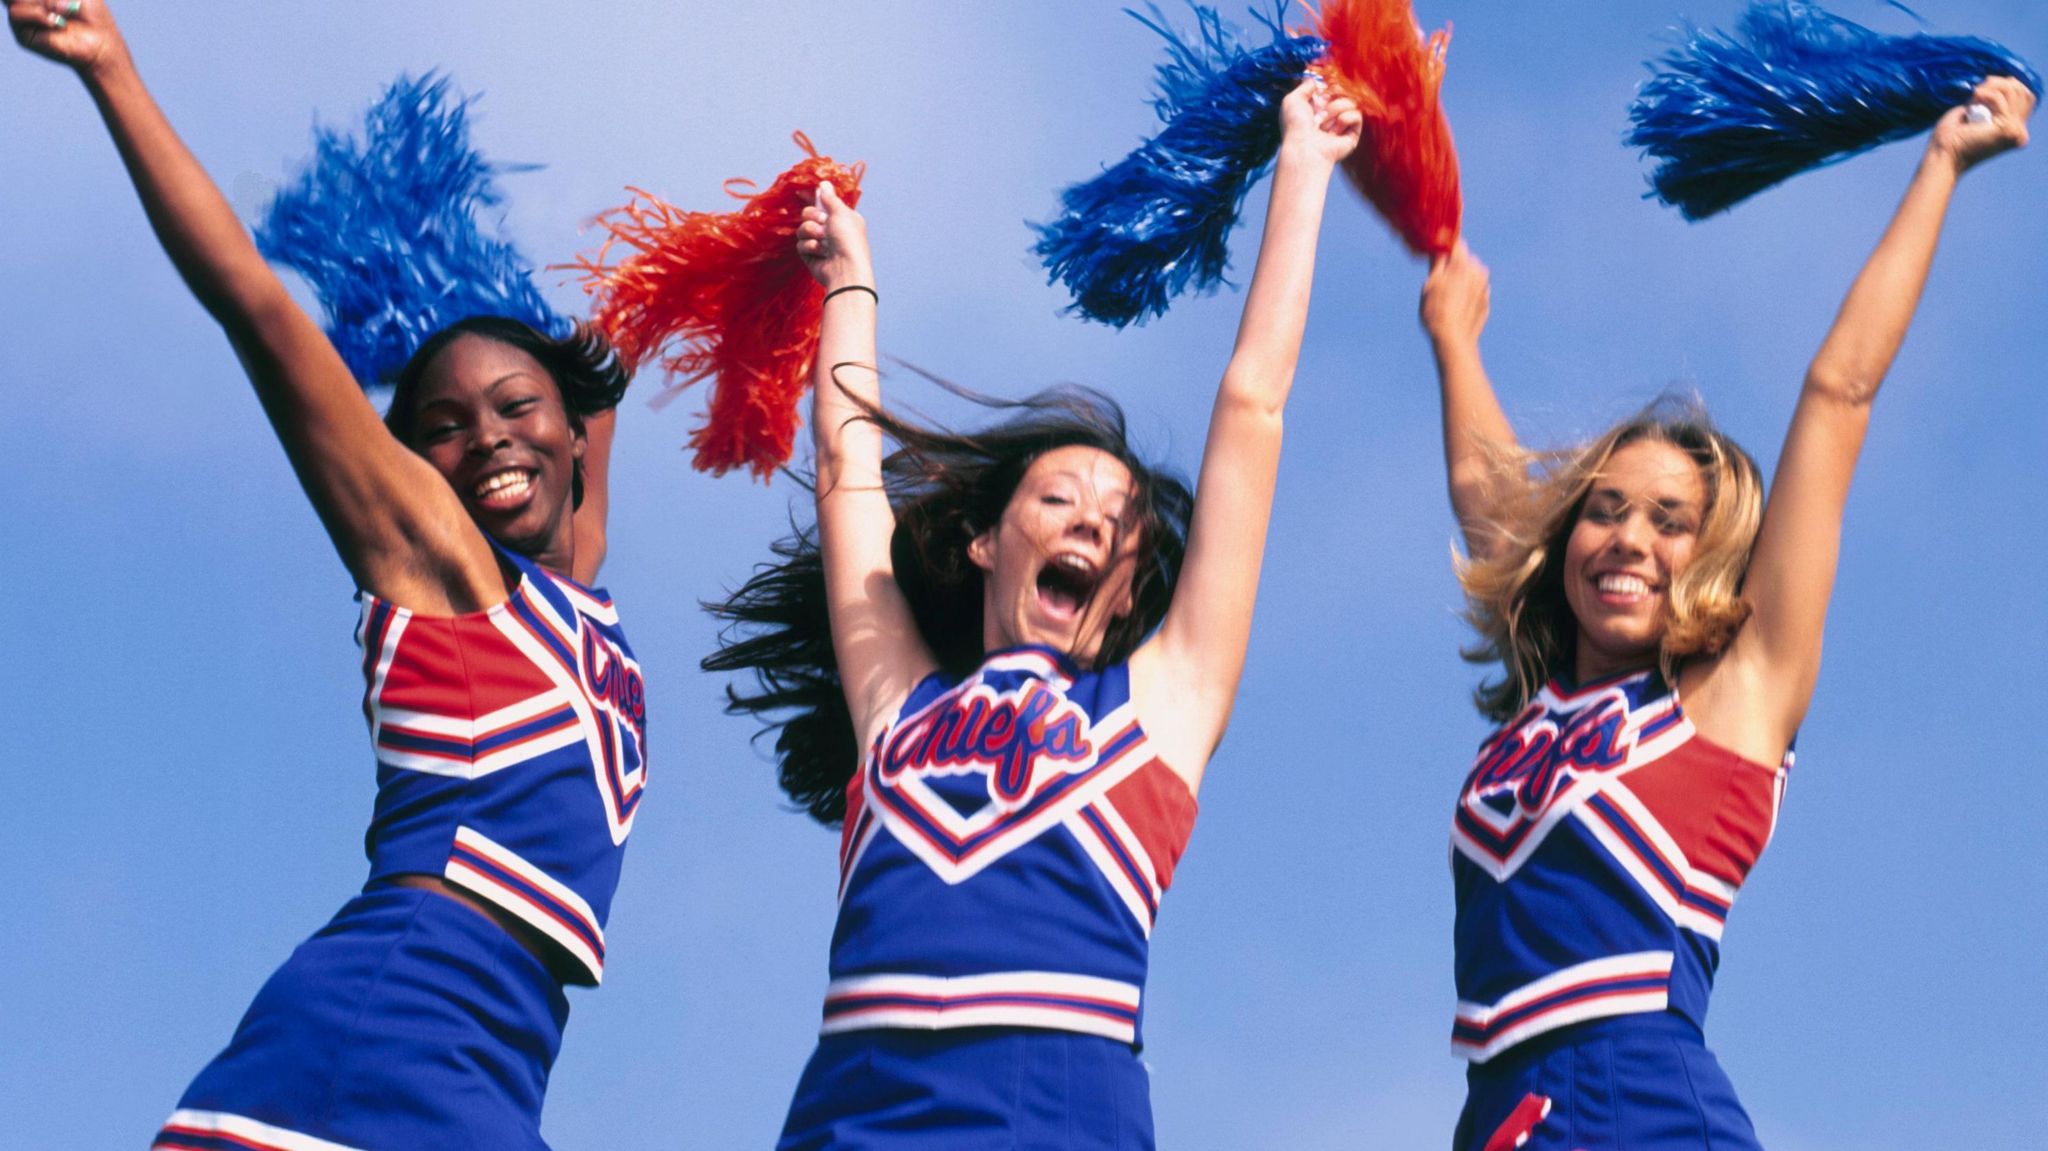 Three cheerleaders wearing blue uniforms jump while holding pom-poms